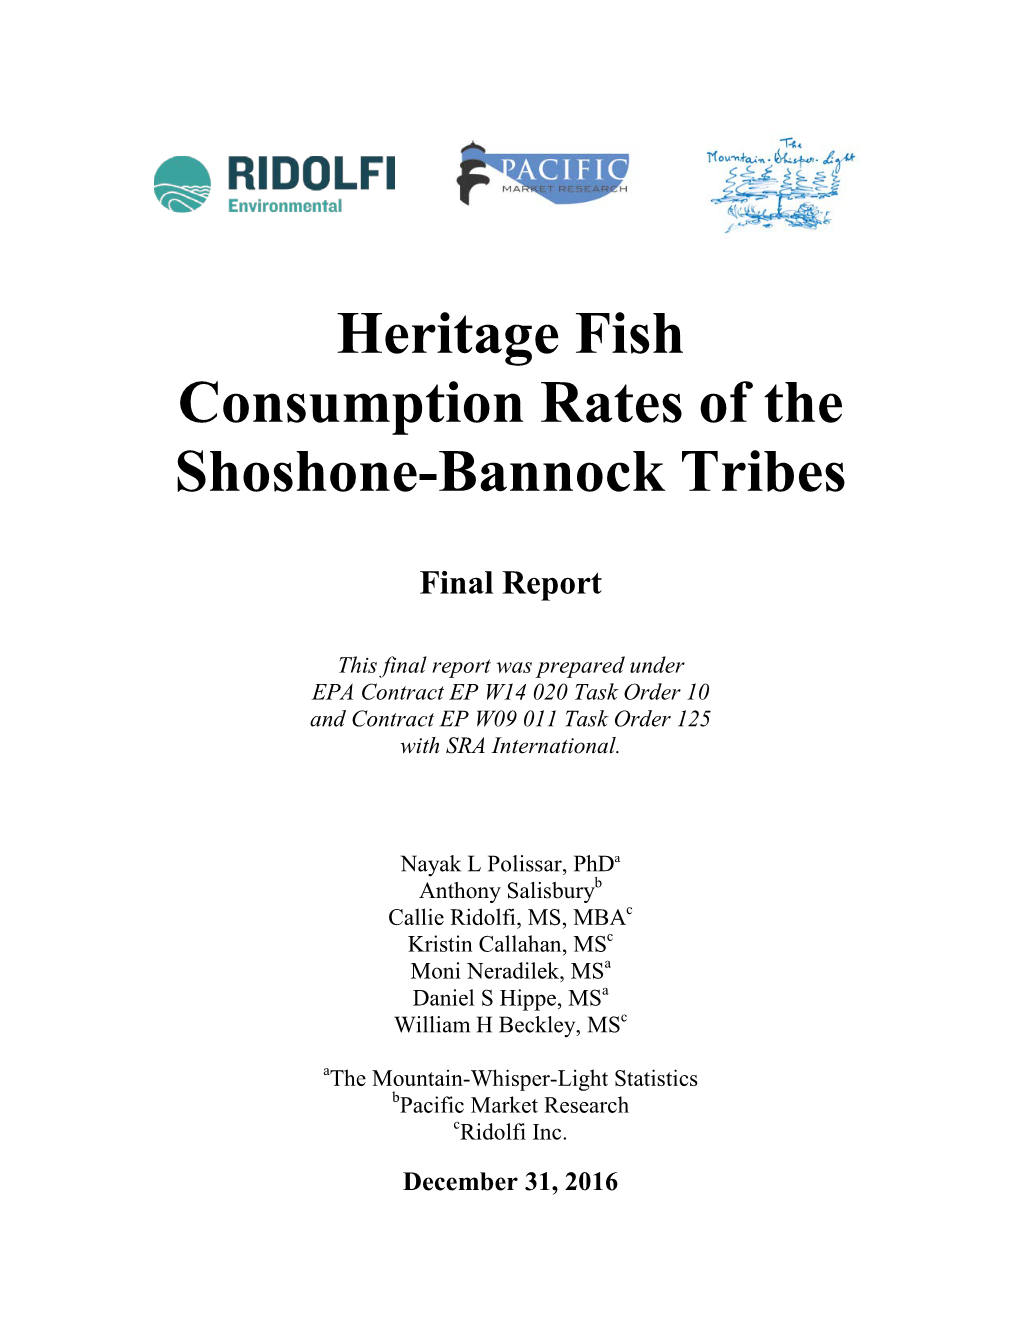 Heritage Fish Consumption Rates of the Shoshone-Bannock Tribes